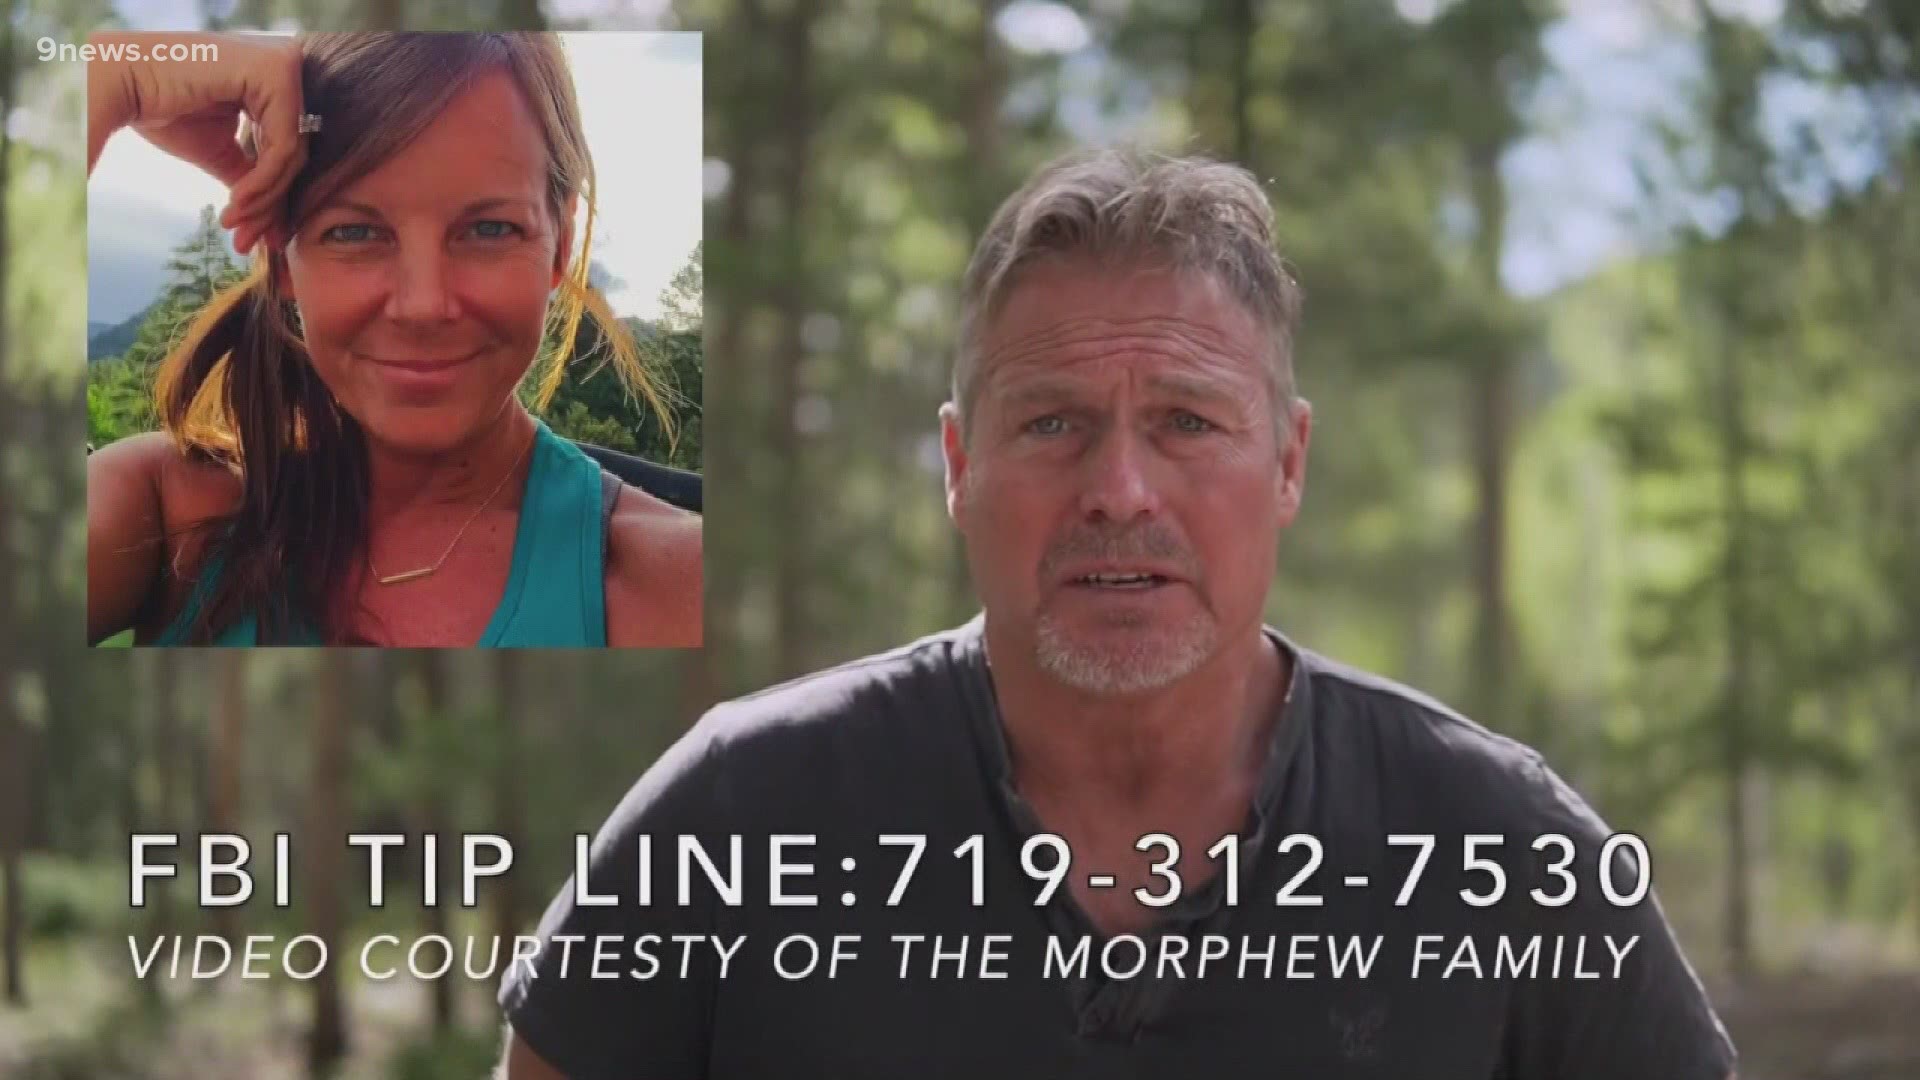 Barry Morphew, the husband of missing woman Suzanne Morphew, has been arrested on numerous charges including first-degree murder in connection with her death.